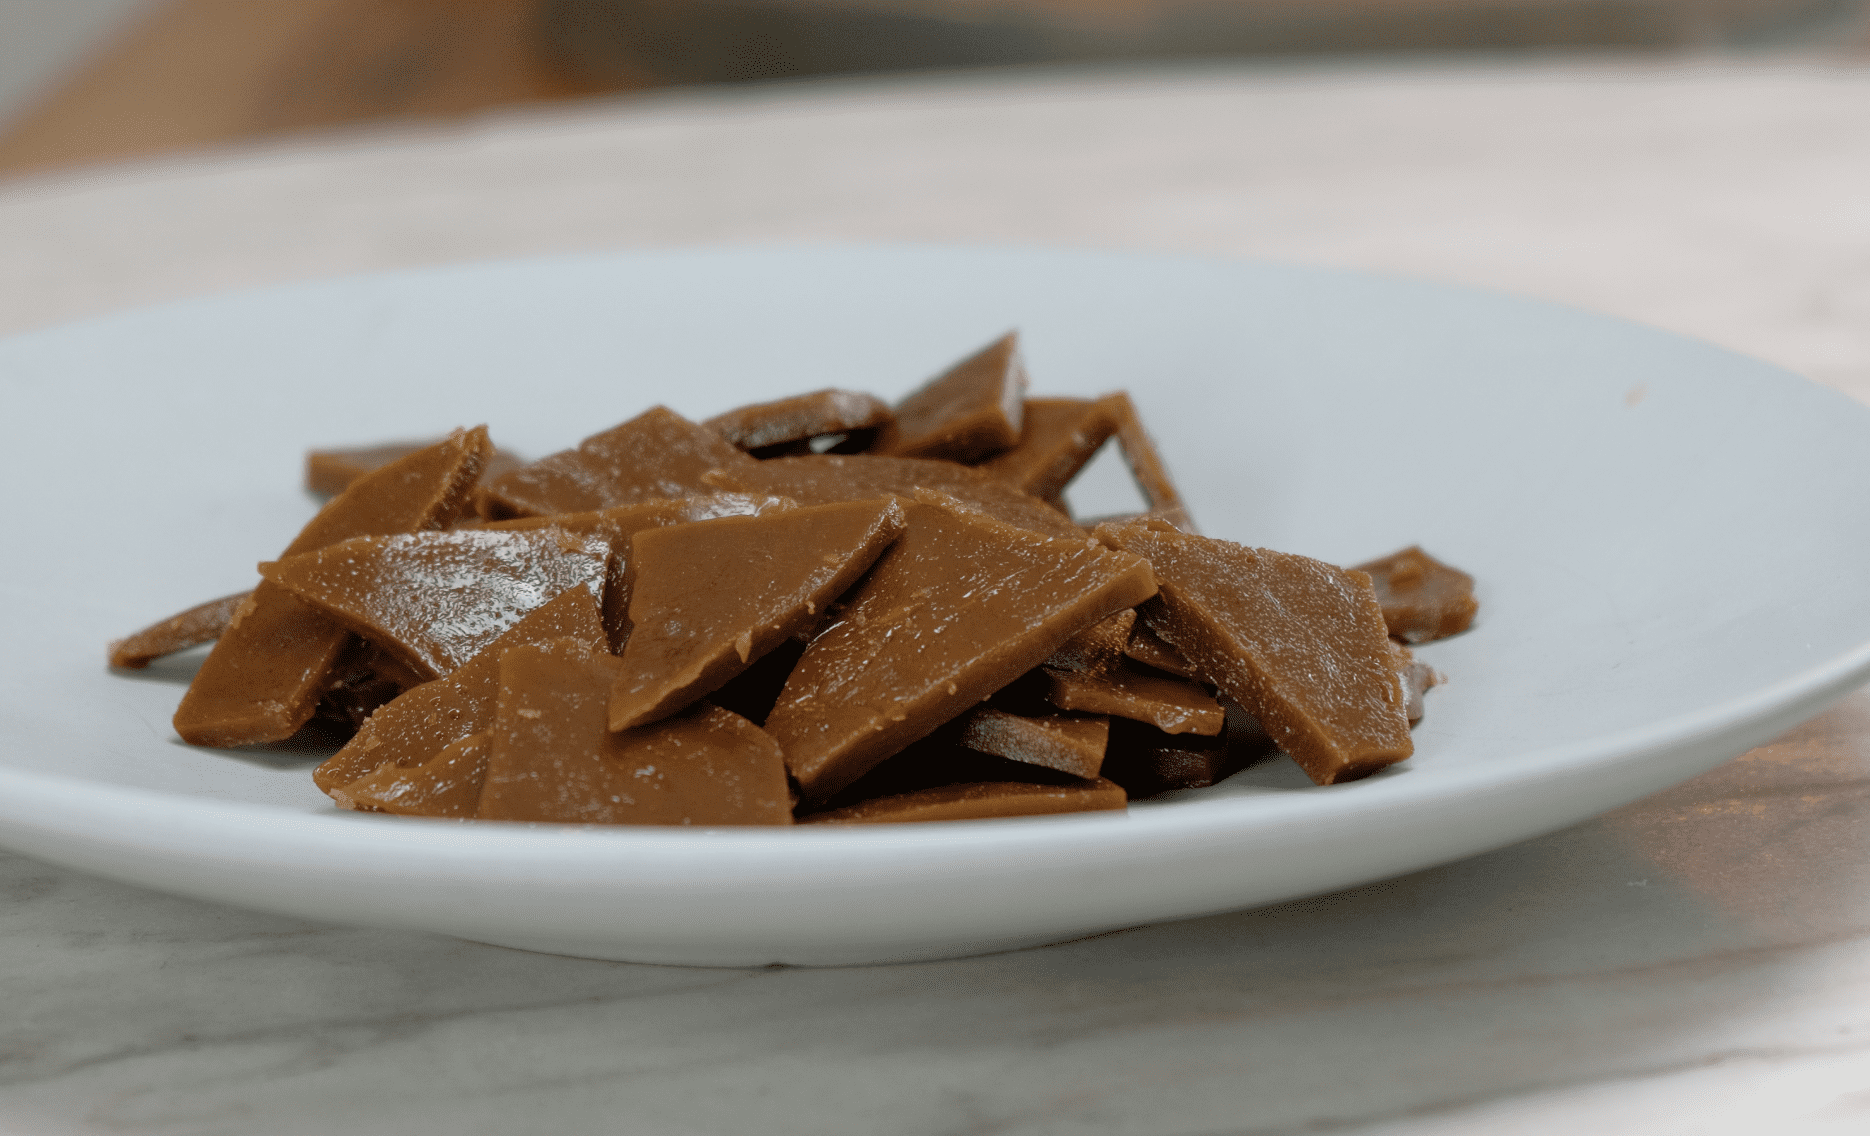 FINISHED VEGAN TOFFEE